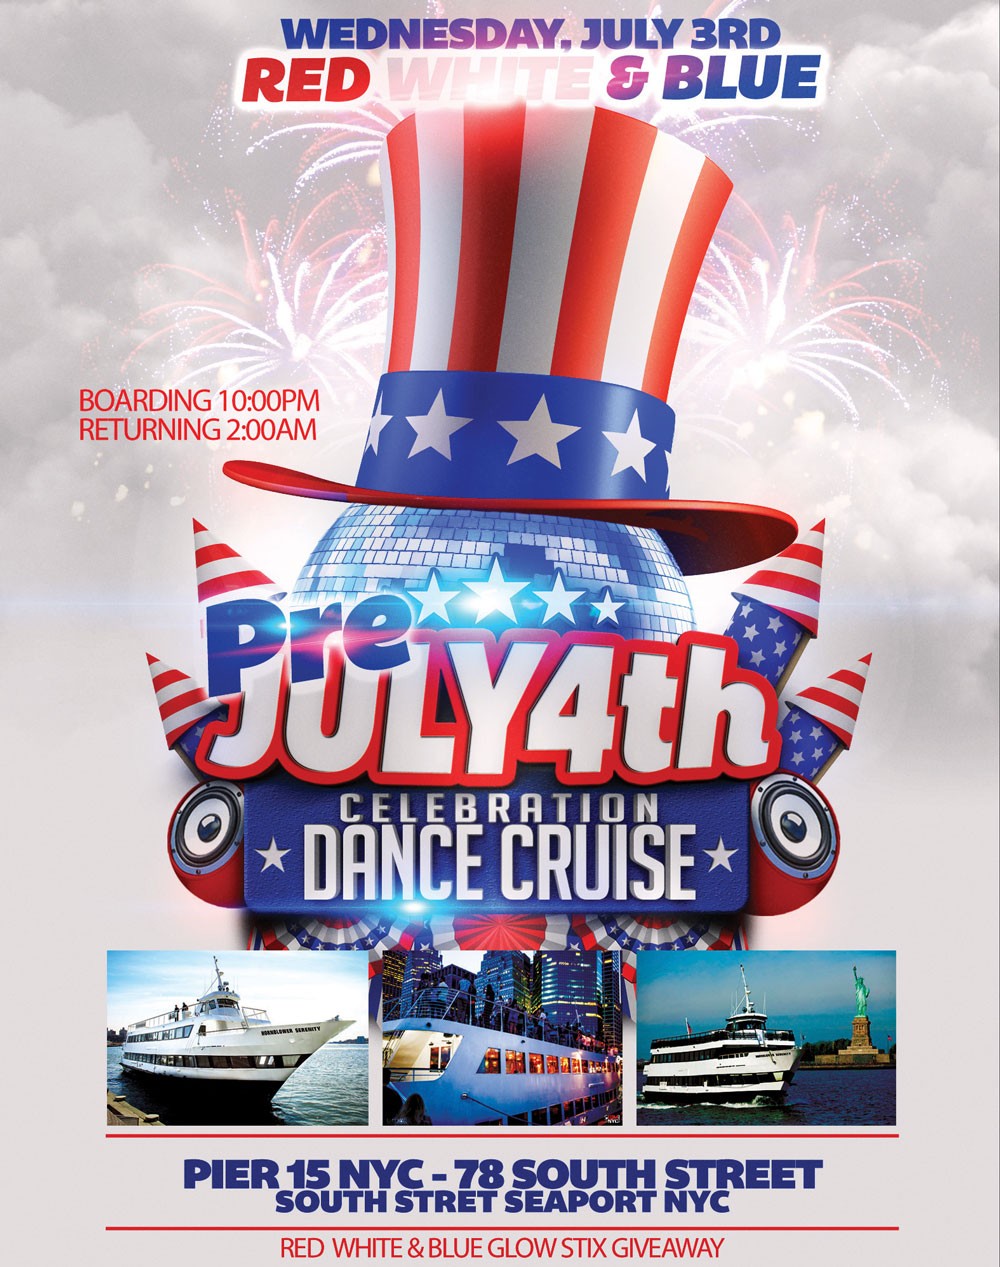 Red White and Blue July 4th Weekend Party Dance Cruise Hornblower Yacht NYC at Pier 15 NYC South Street Seaport Flyer